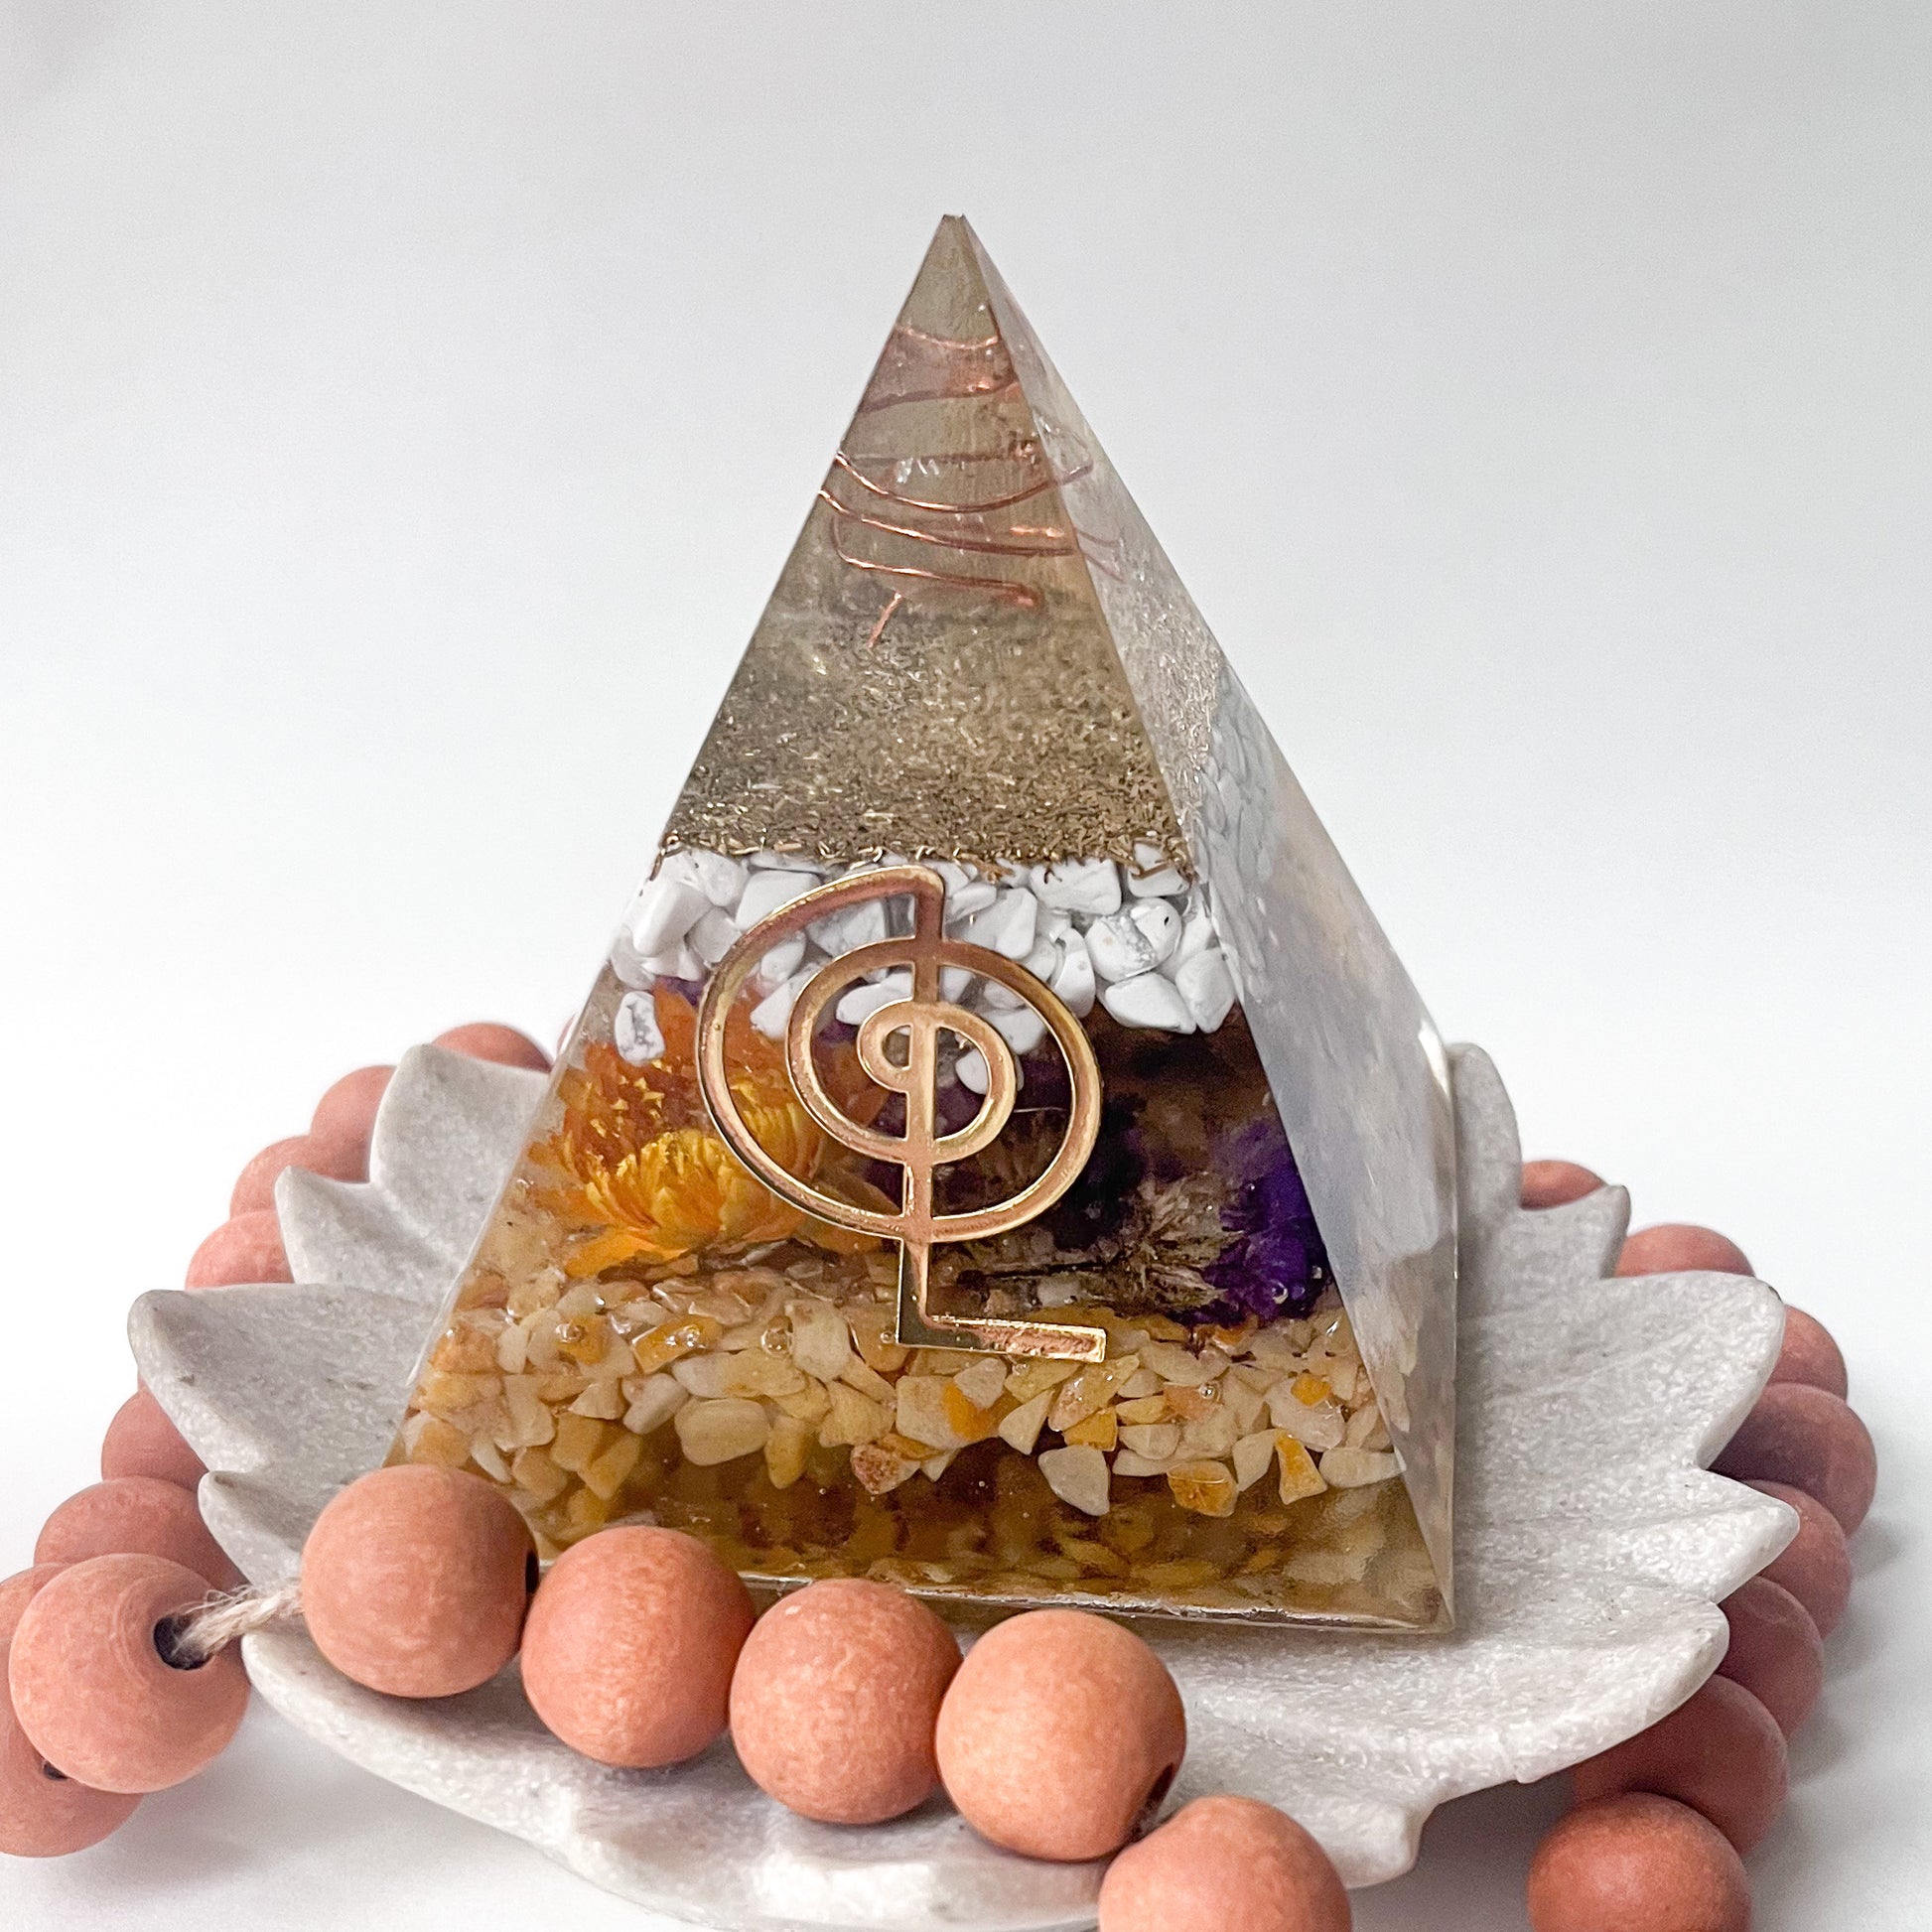 Beautifully crafted orgonite pyramid for meditation and relaxation